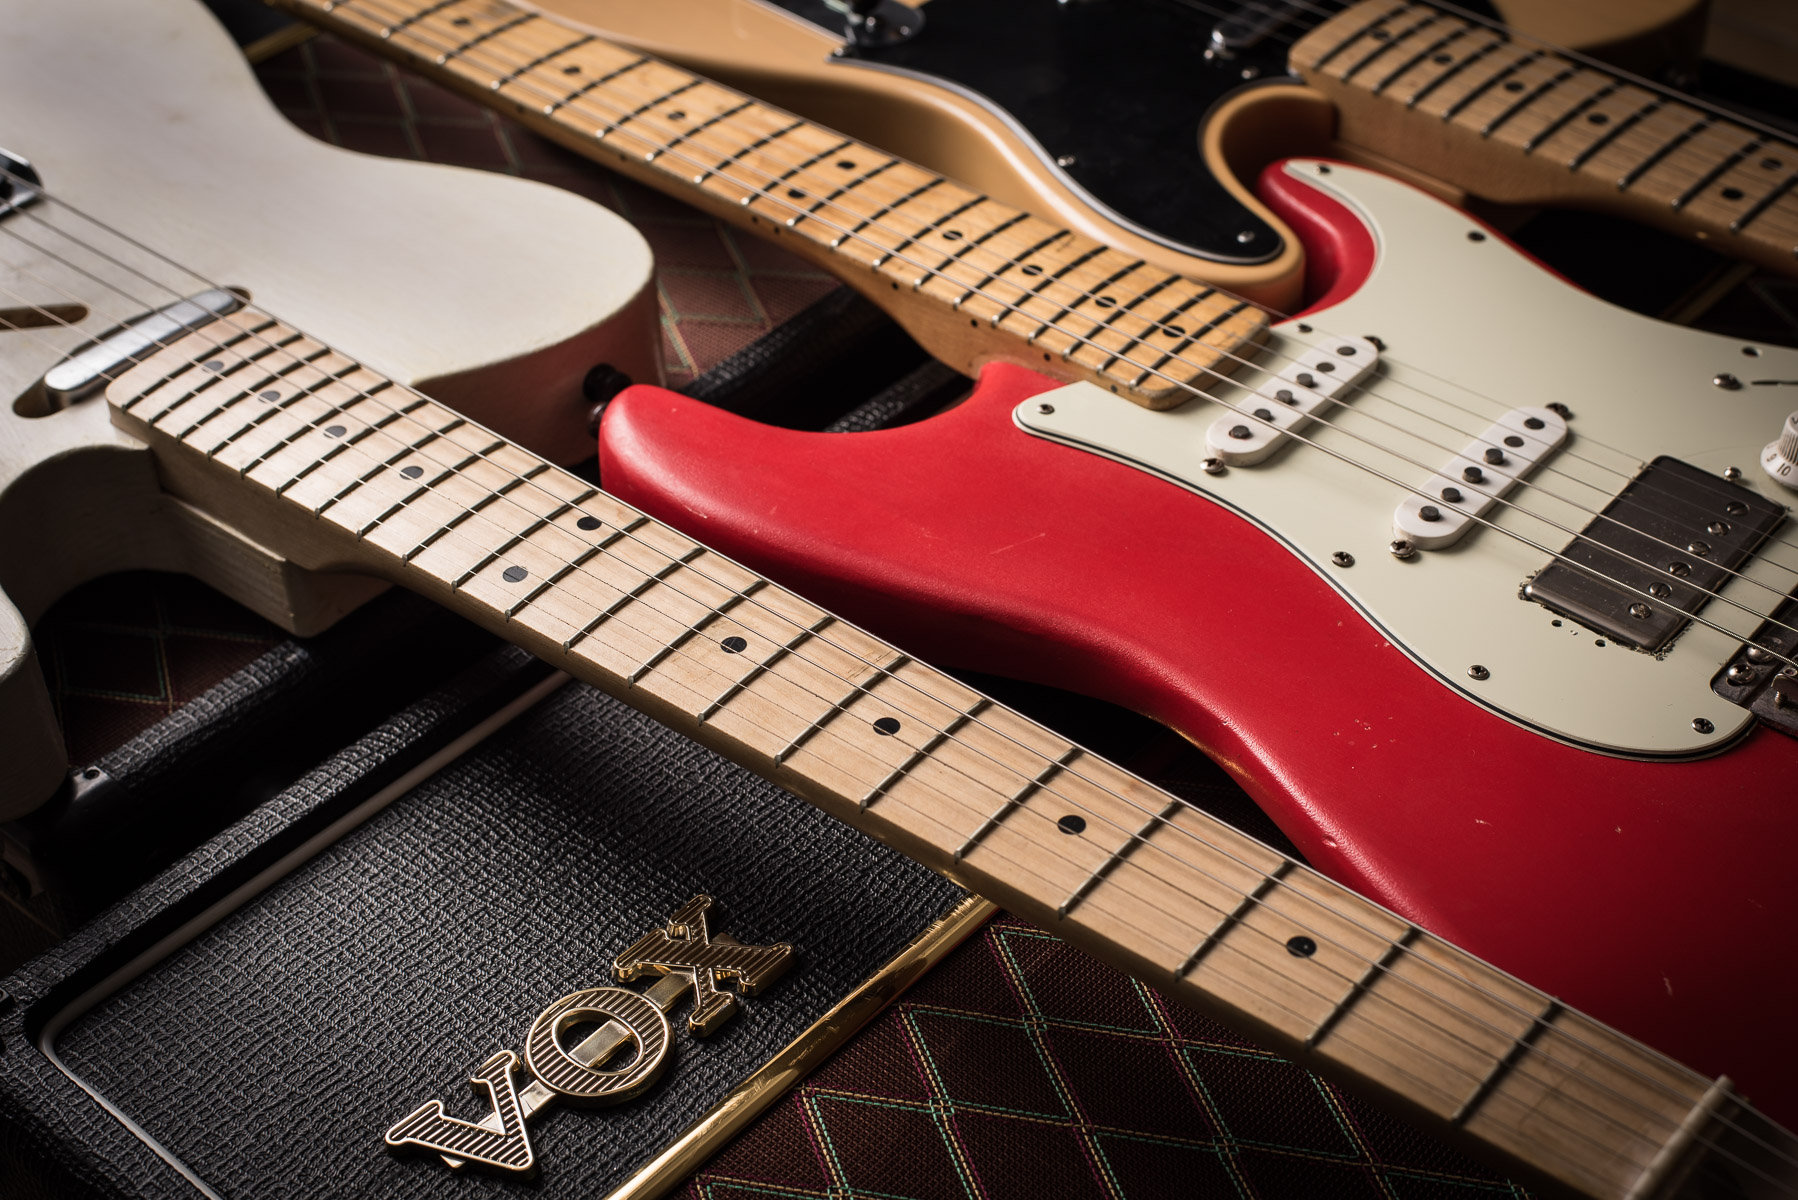 Cover image of a red fender stratocaster and a yellow and white fender telecaster, along with a vox ac30 and ac15 amplifier used as the cover for the "Things to know before your first guitar lesson" blog.